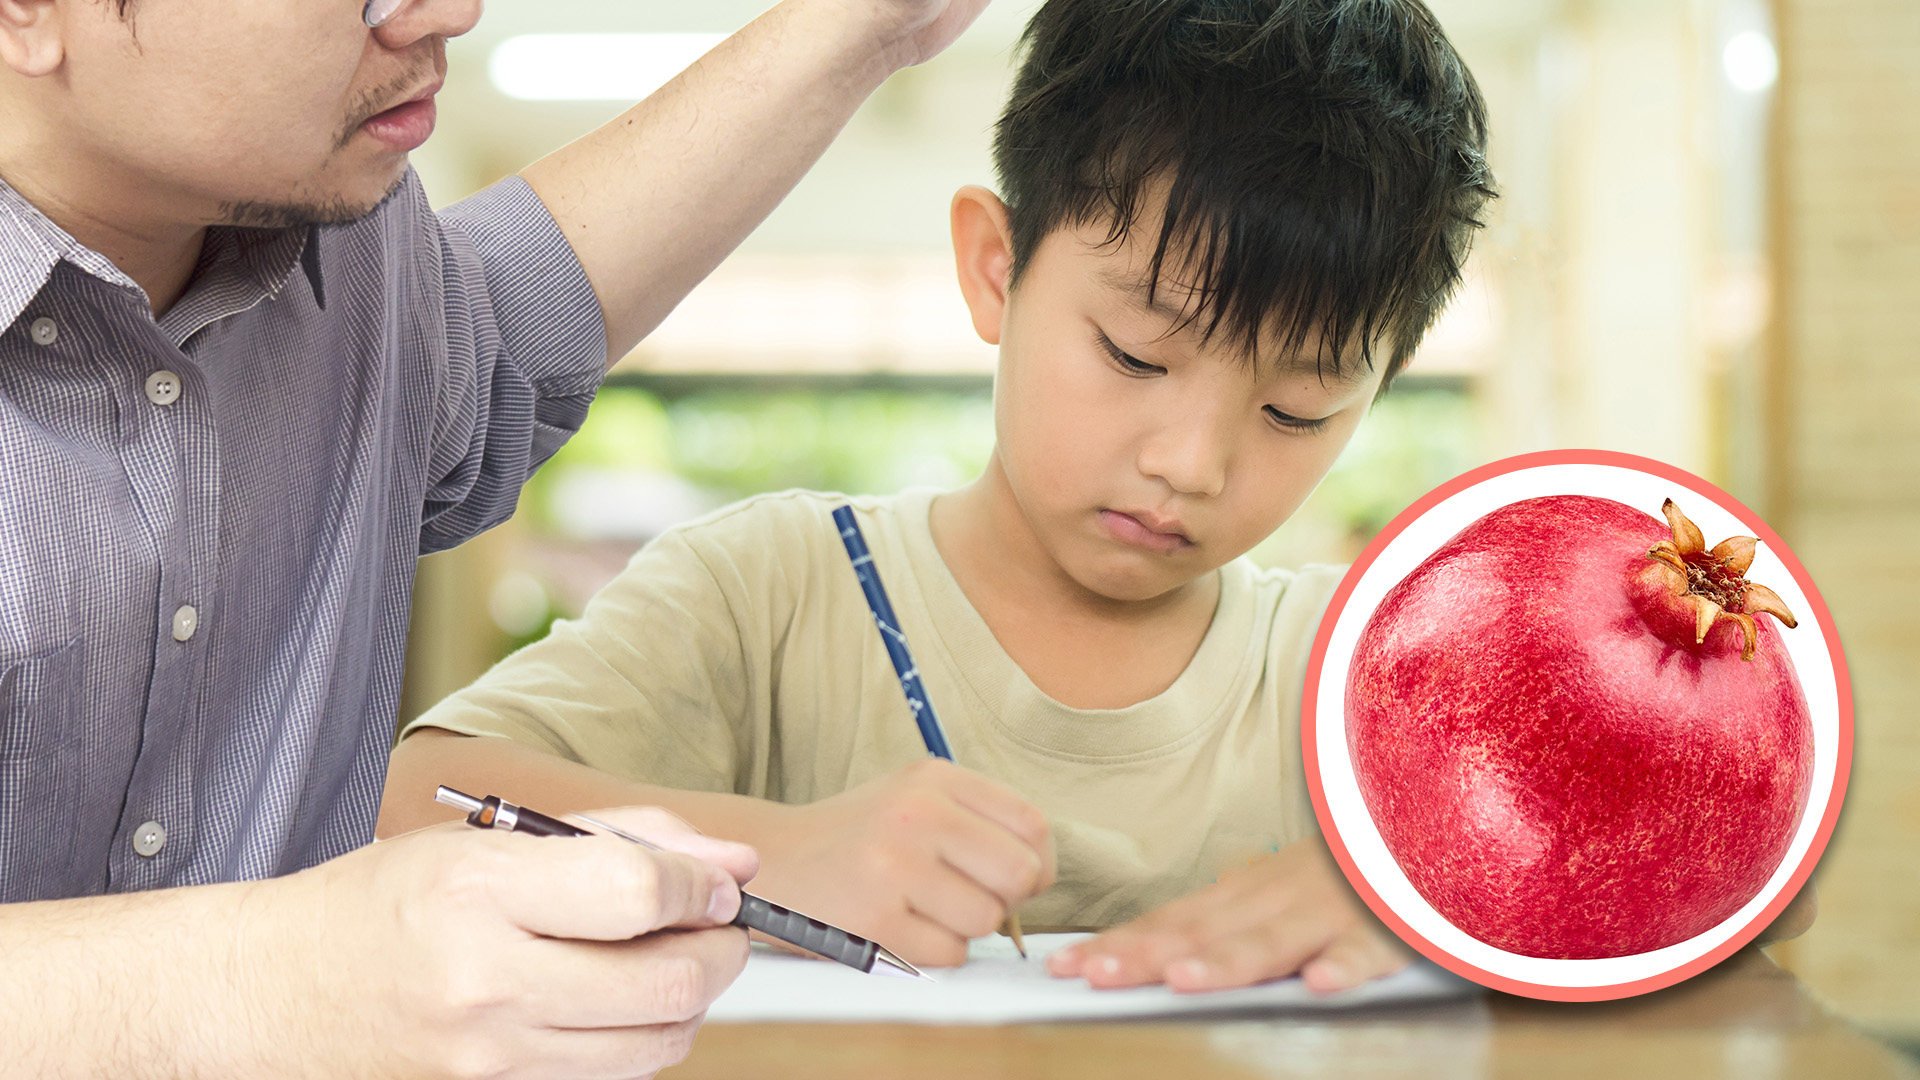 A father in China lost his cool during a home tutoring session with his son and hit the boy with a pomegranate, rupturing the child’s spleen. Photo: SCMP composite/Shutterstock